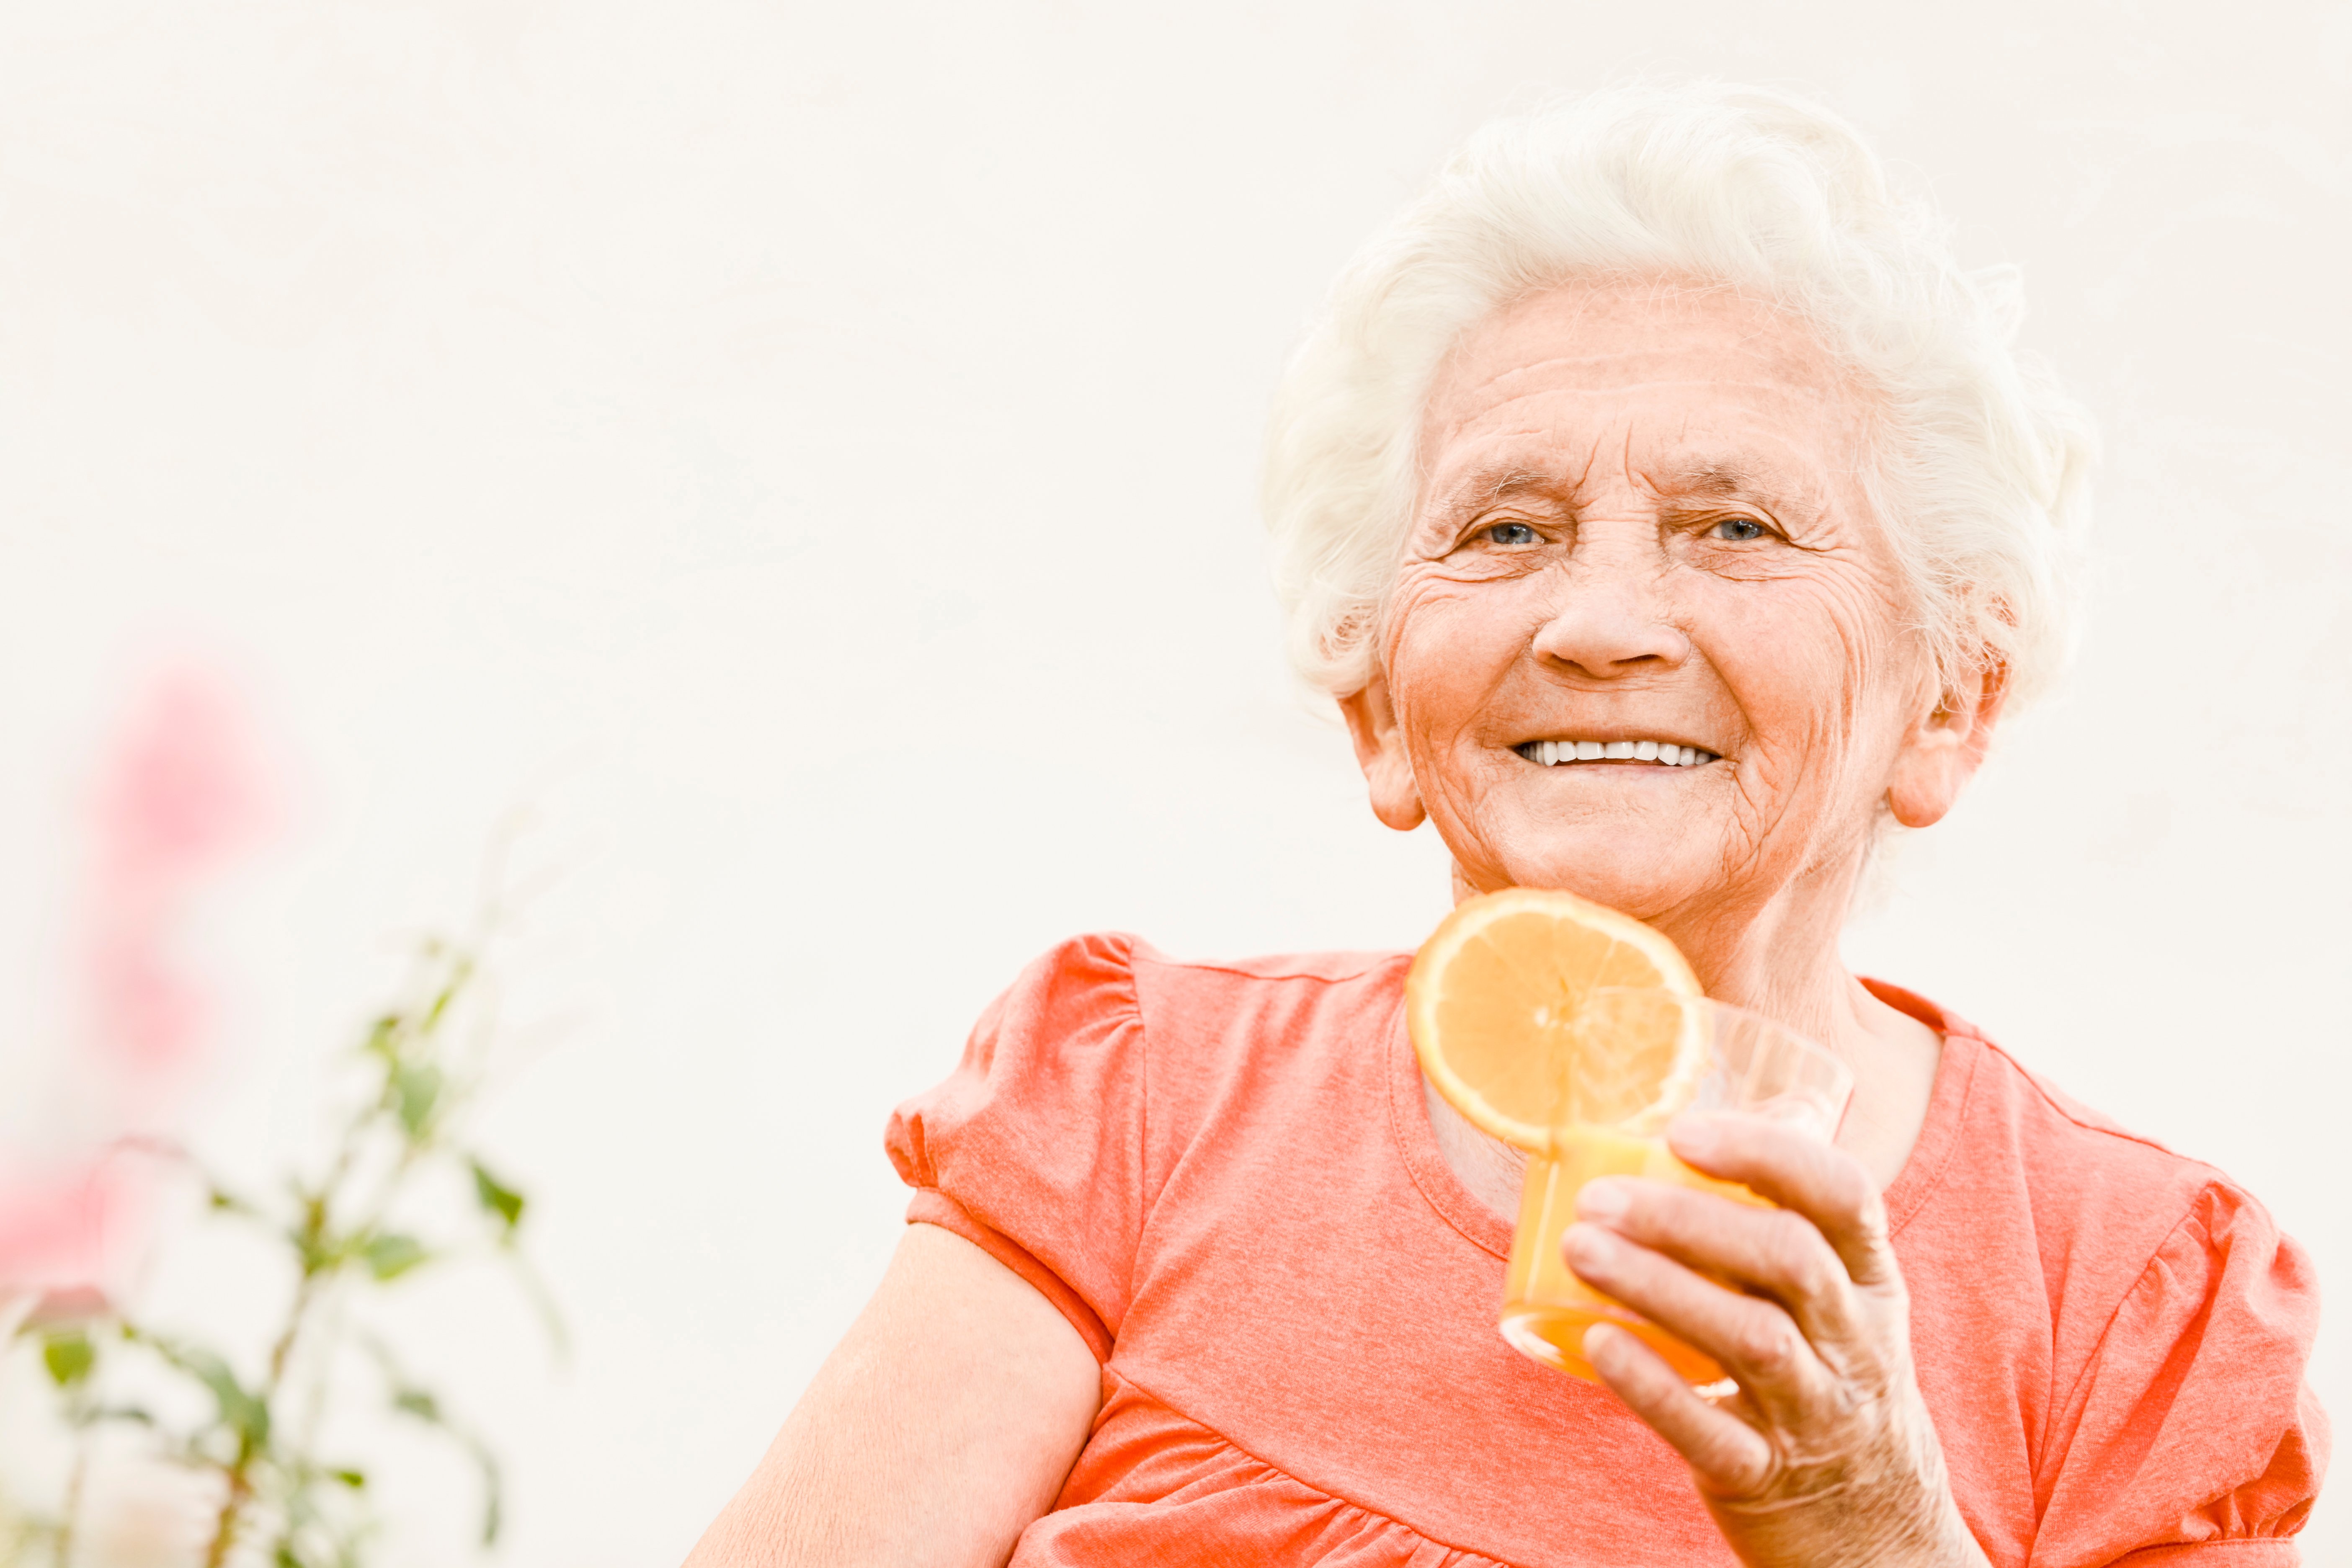 Elderly women drinking orange juice and smiling for a photo